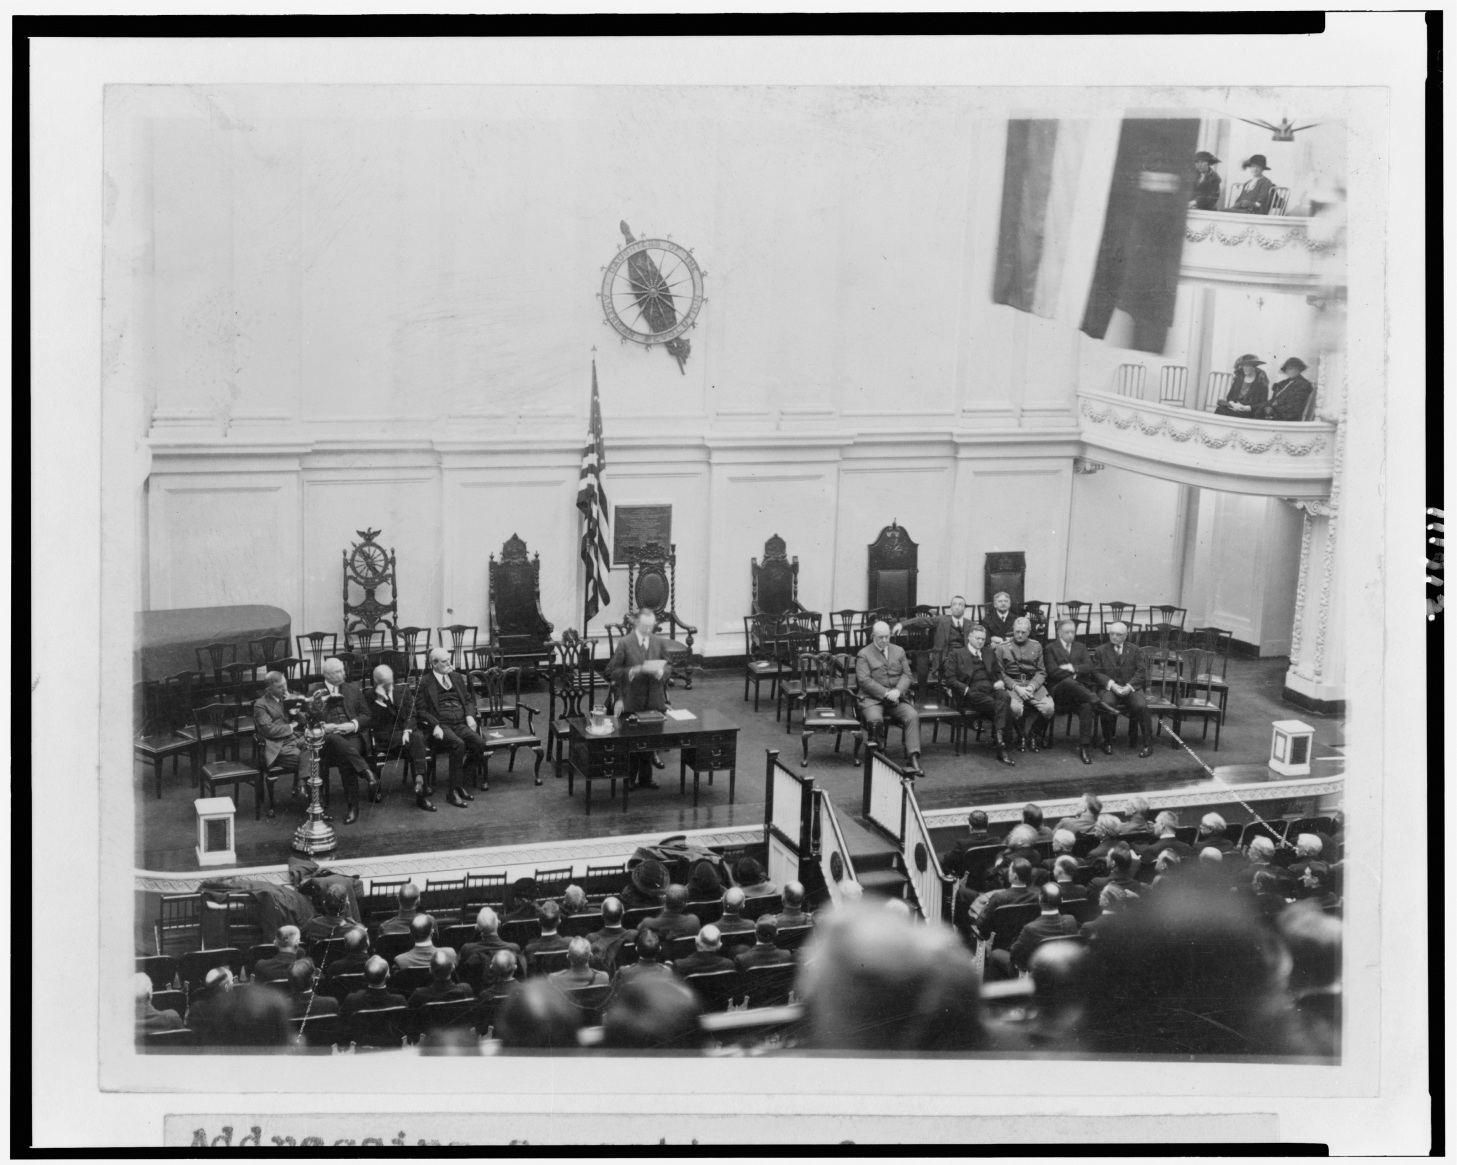 Vice President Coolidge directing the Budget meeting in Harding's absence, 1923. 